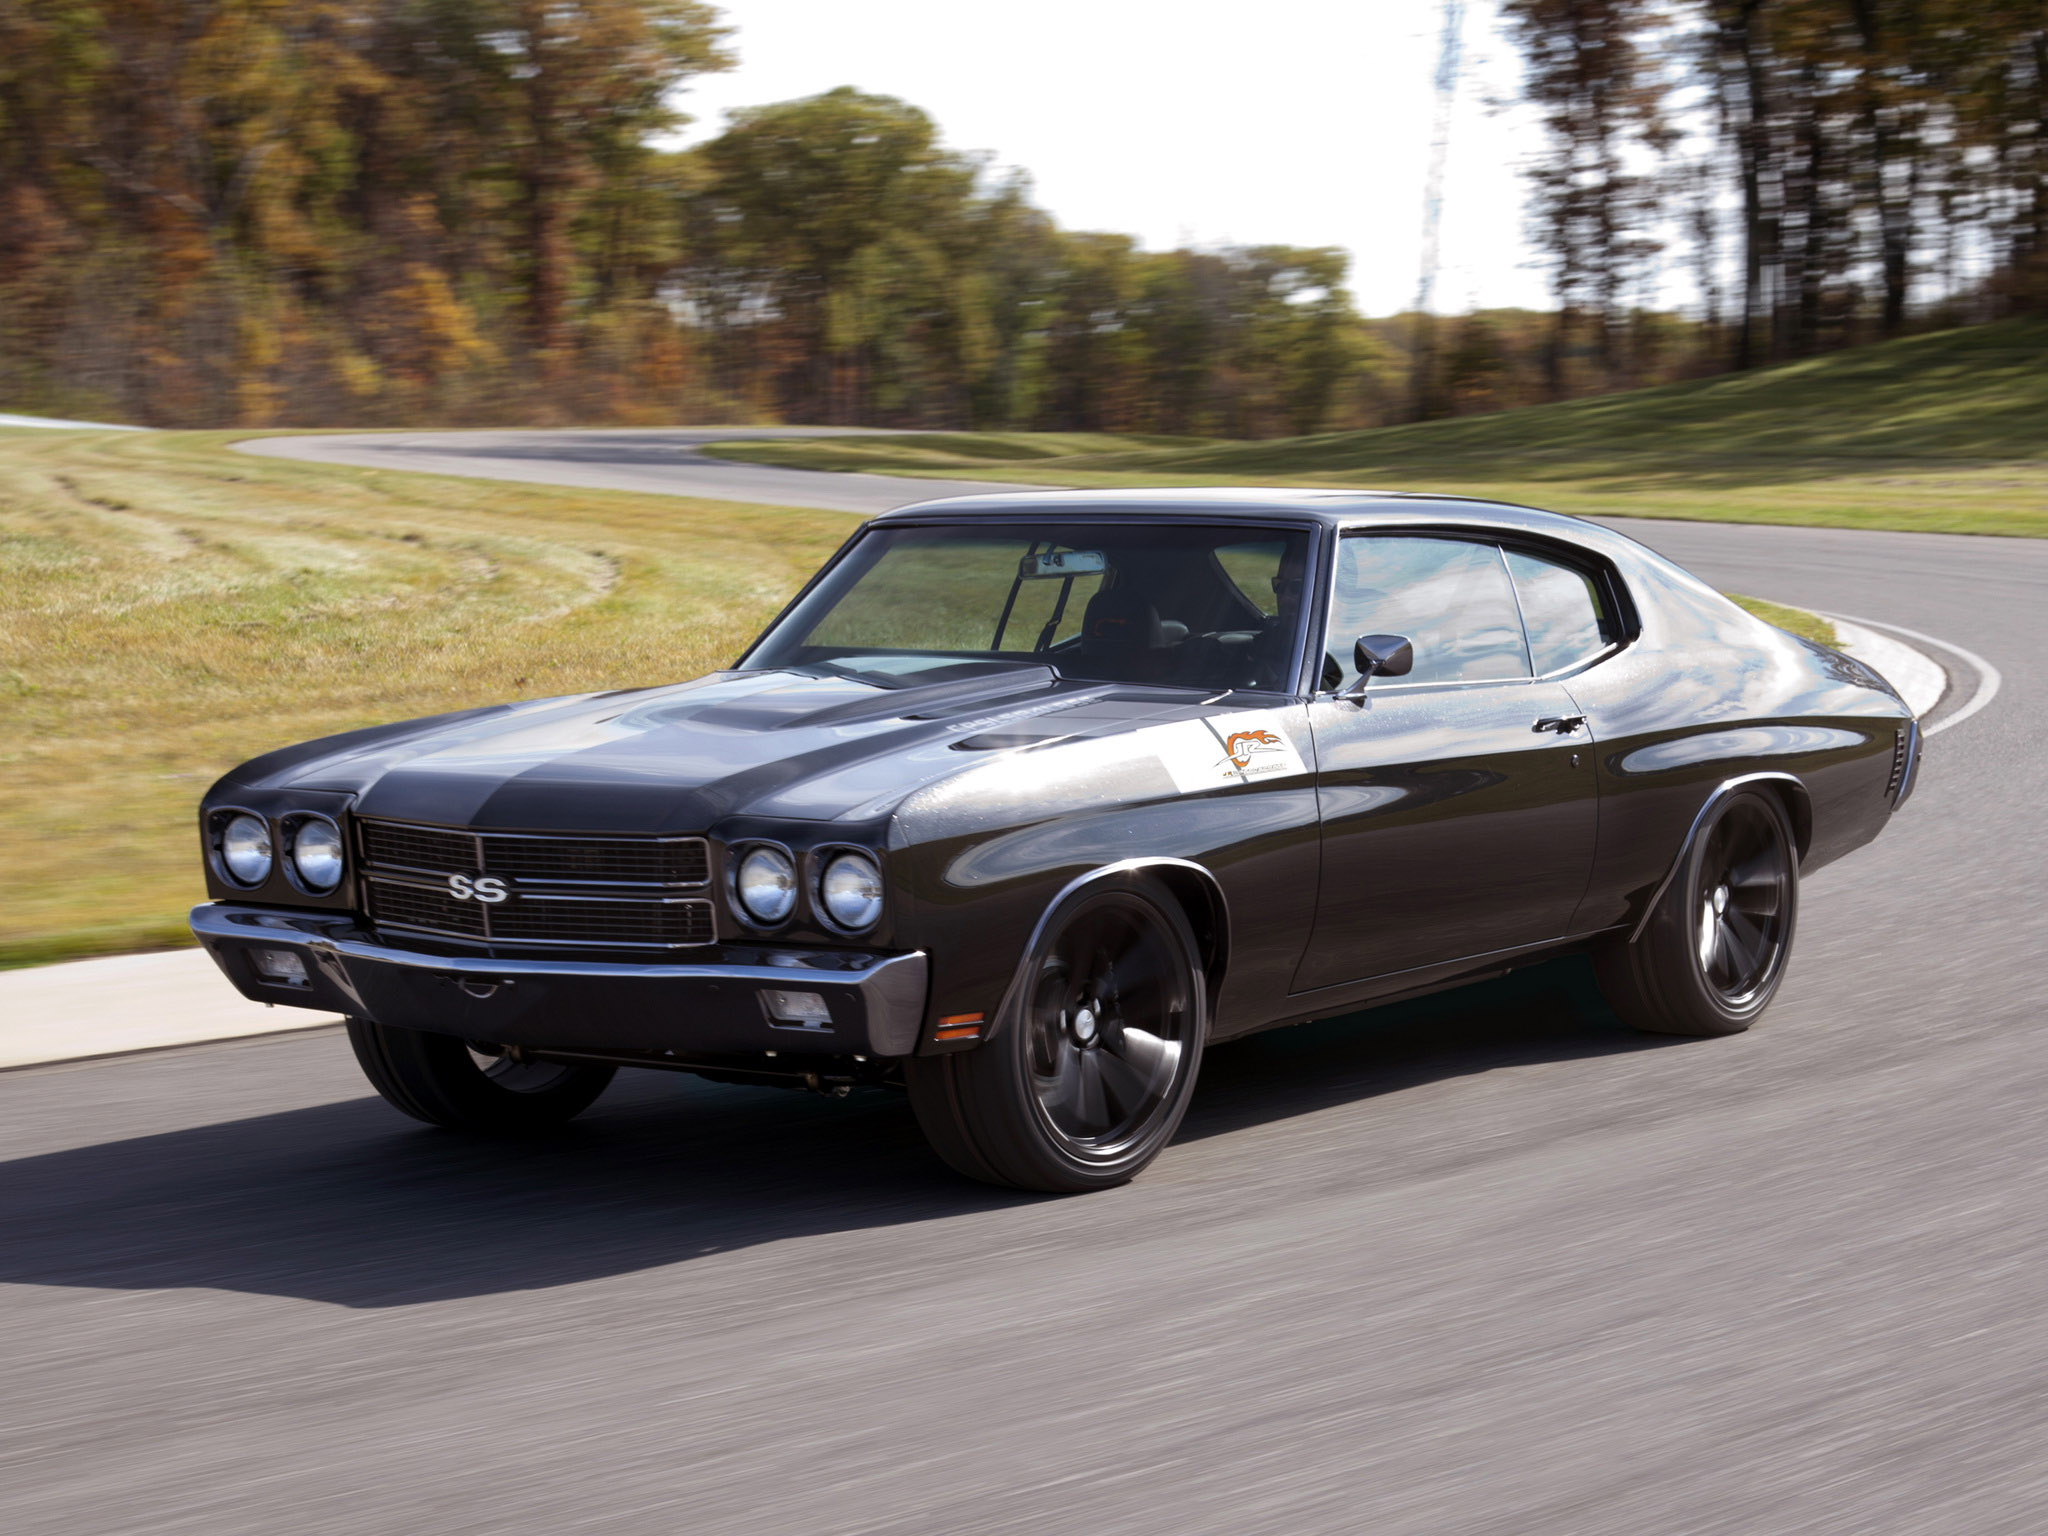 1969 Chevelle Ss Wallpaper Images amp Pictures   Becuo